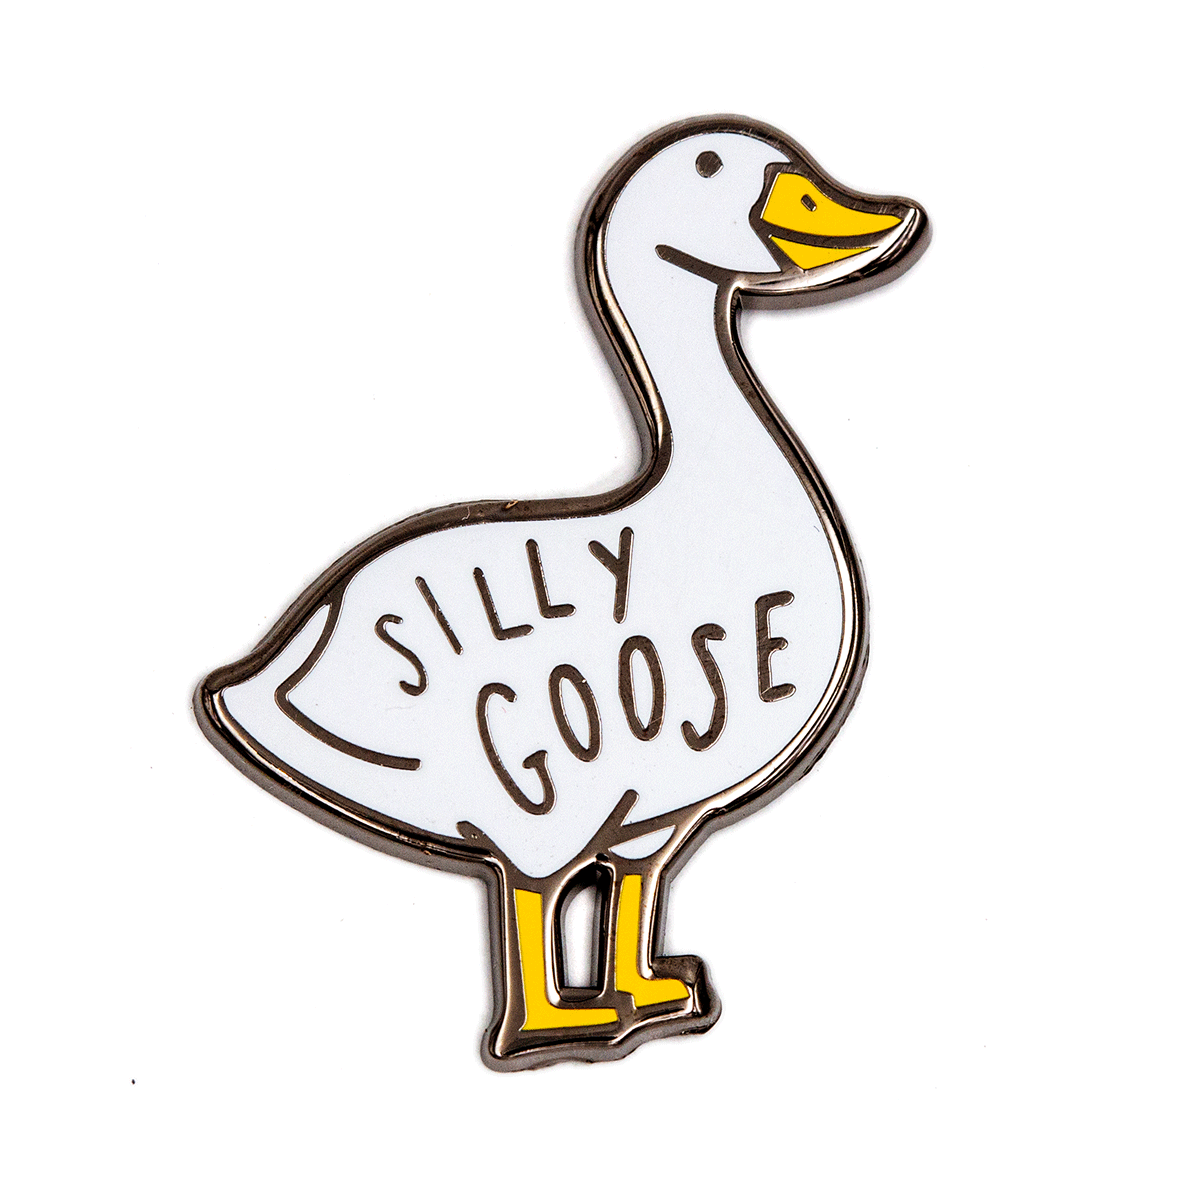 Silly Goose Pin